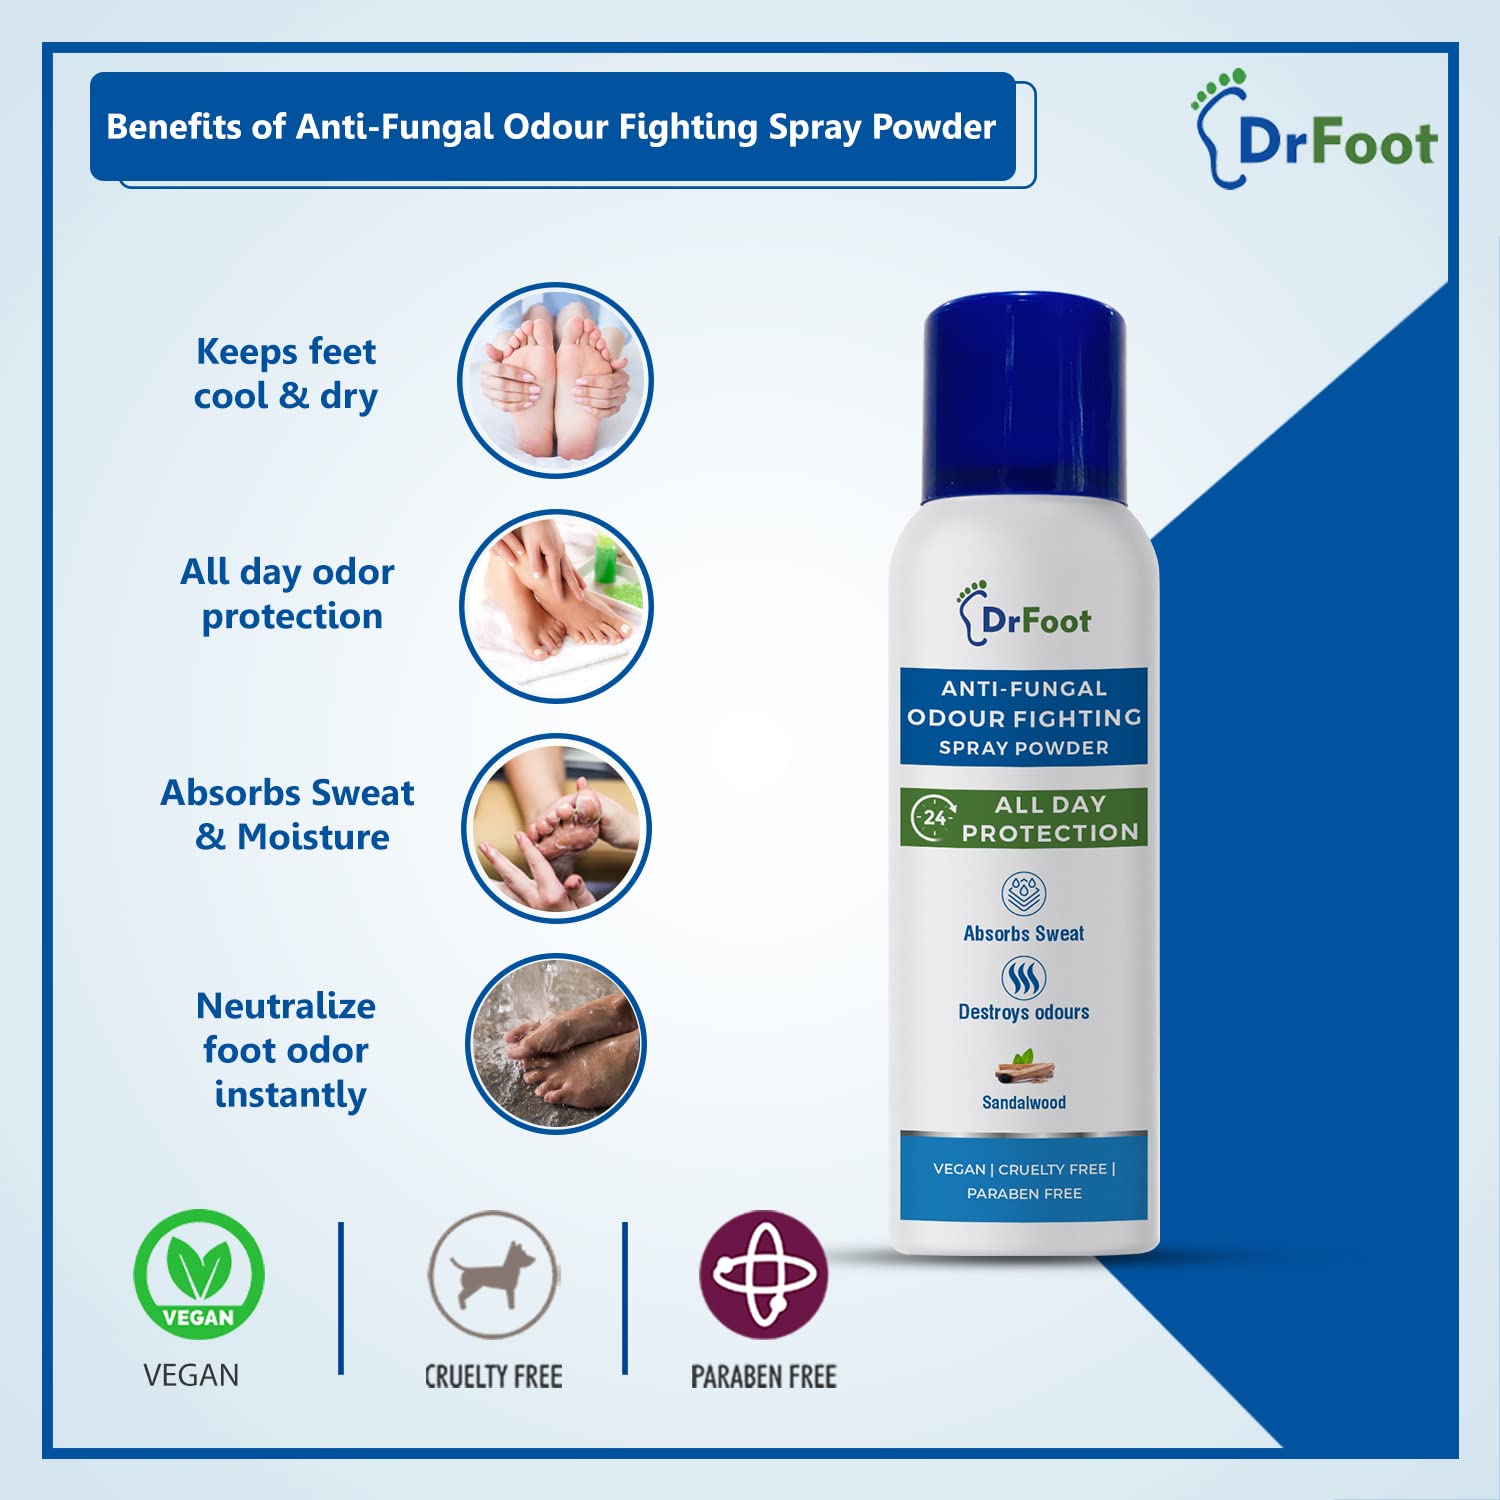 Dr Foot Anti-Fungal Odour Fighting Spray Powder with Neem Powder, Menthol Oil & Sandalwood | Ultimate Odour Neutralizer| Removes Bad Smell & Keep your foot Fresh and Dry – 130ml / 80gm (Pack of 3)